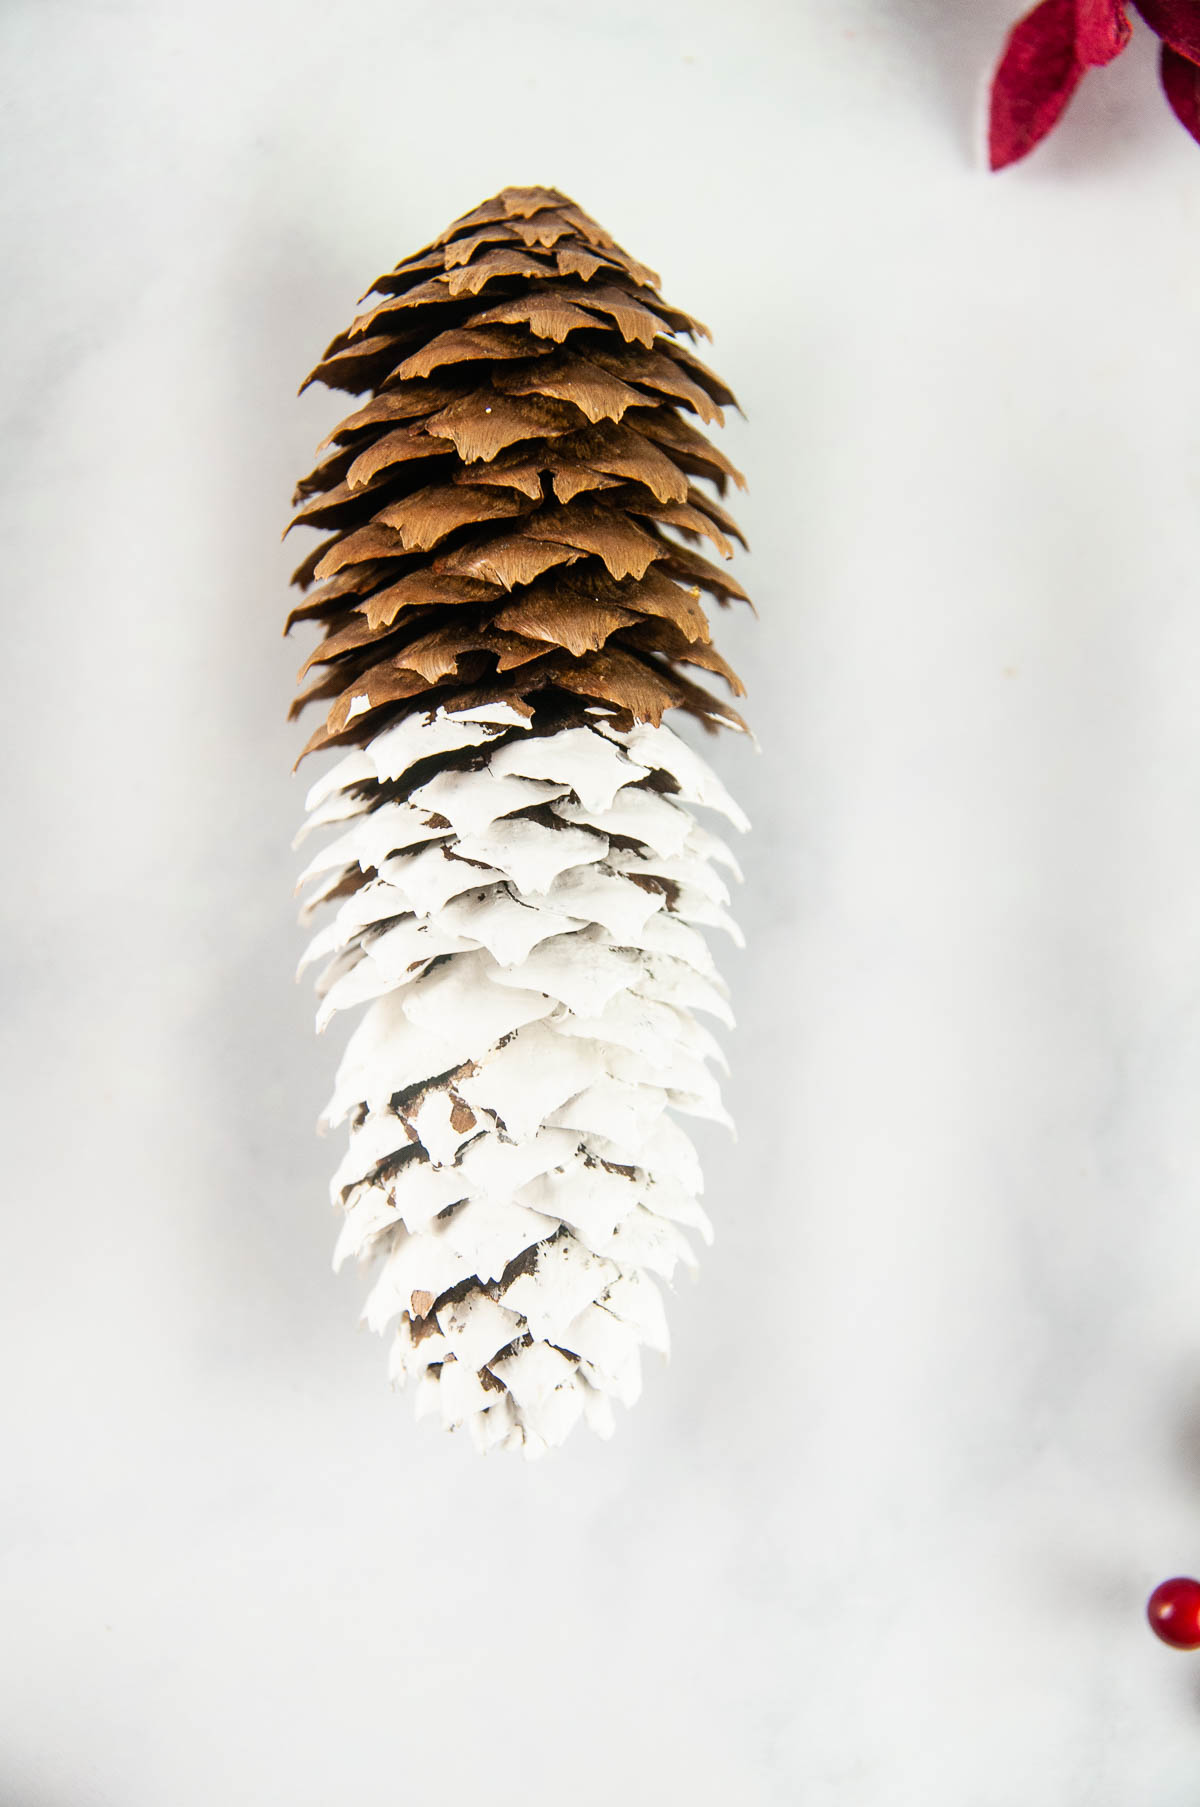 Paint half of the pinecone white.